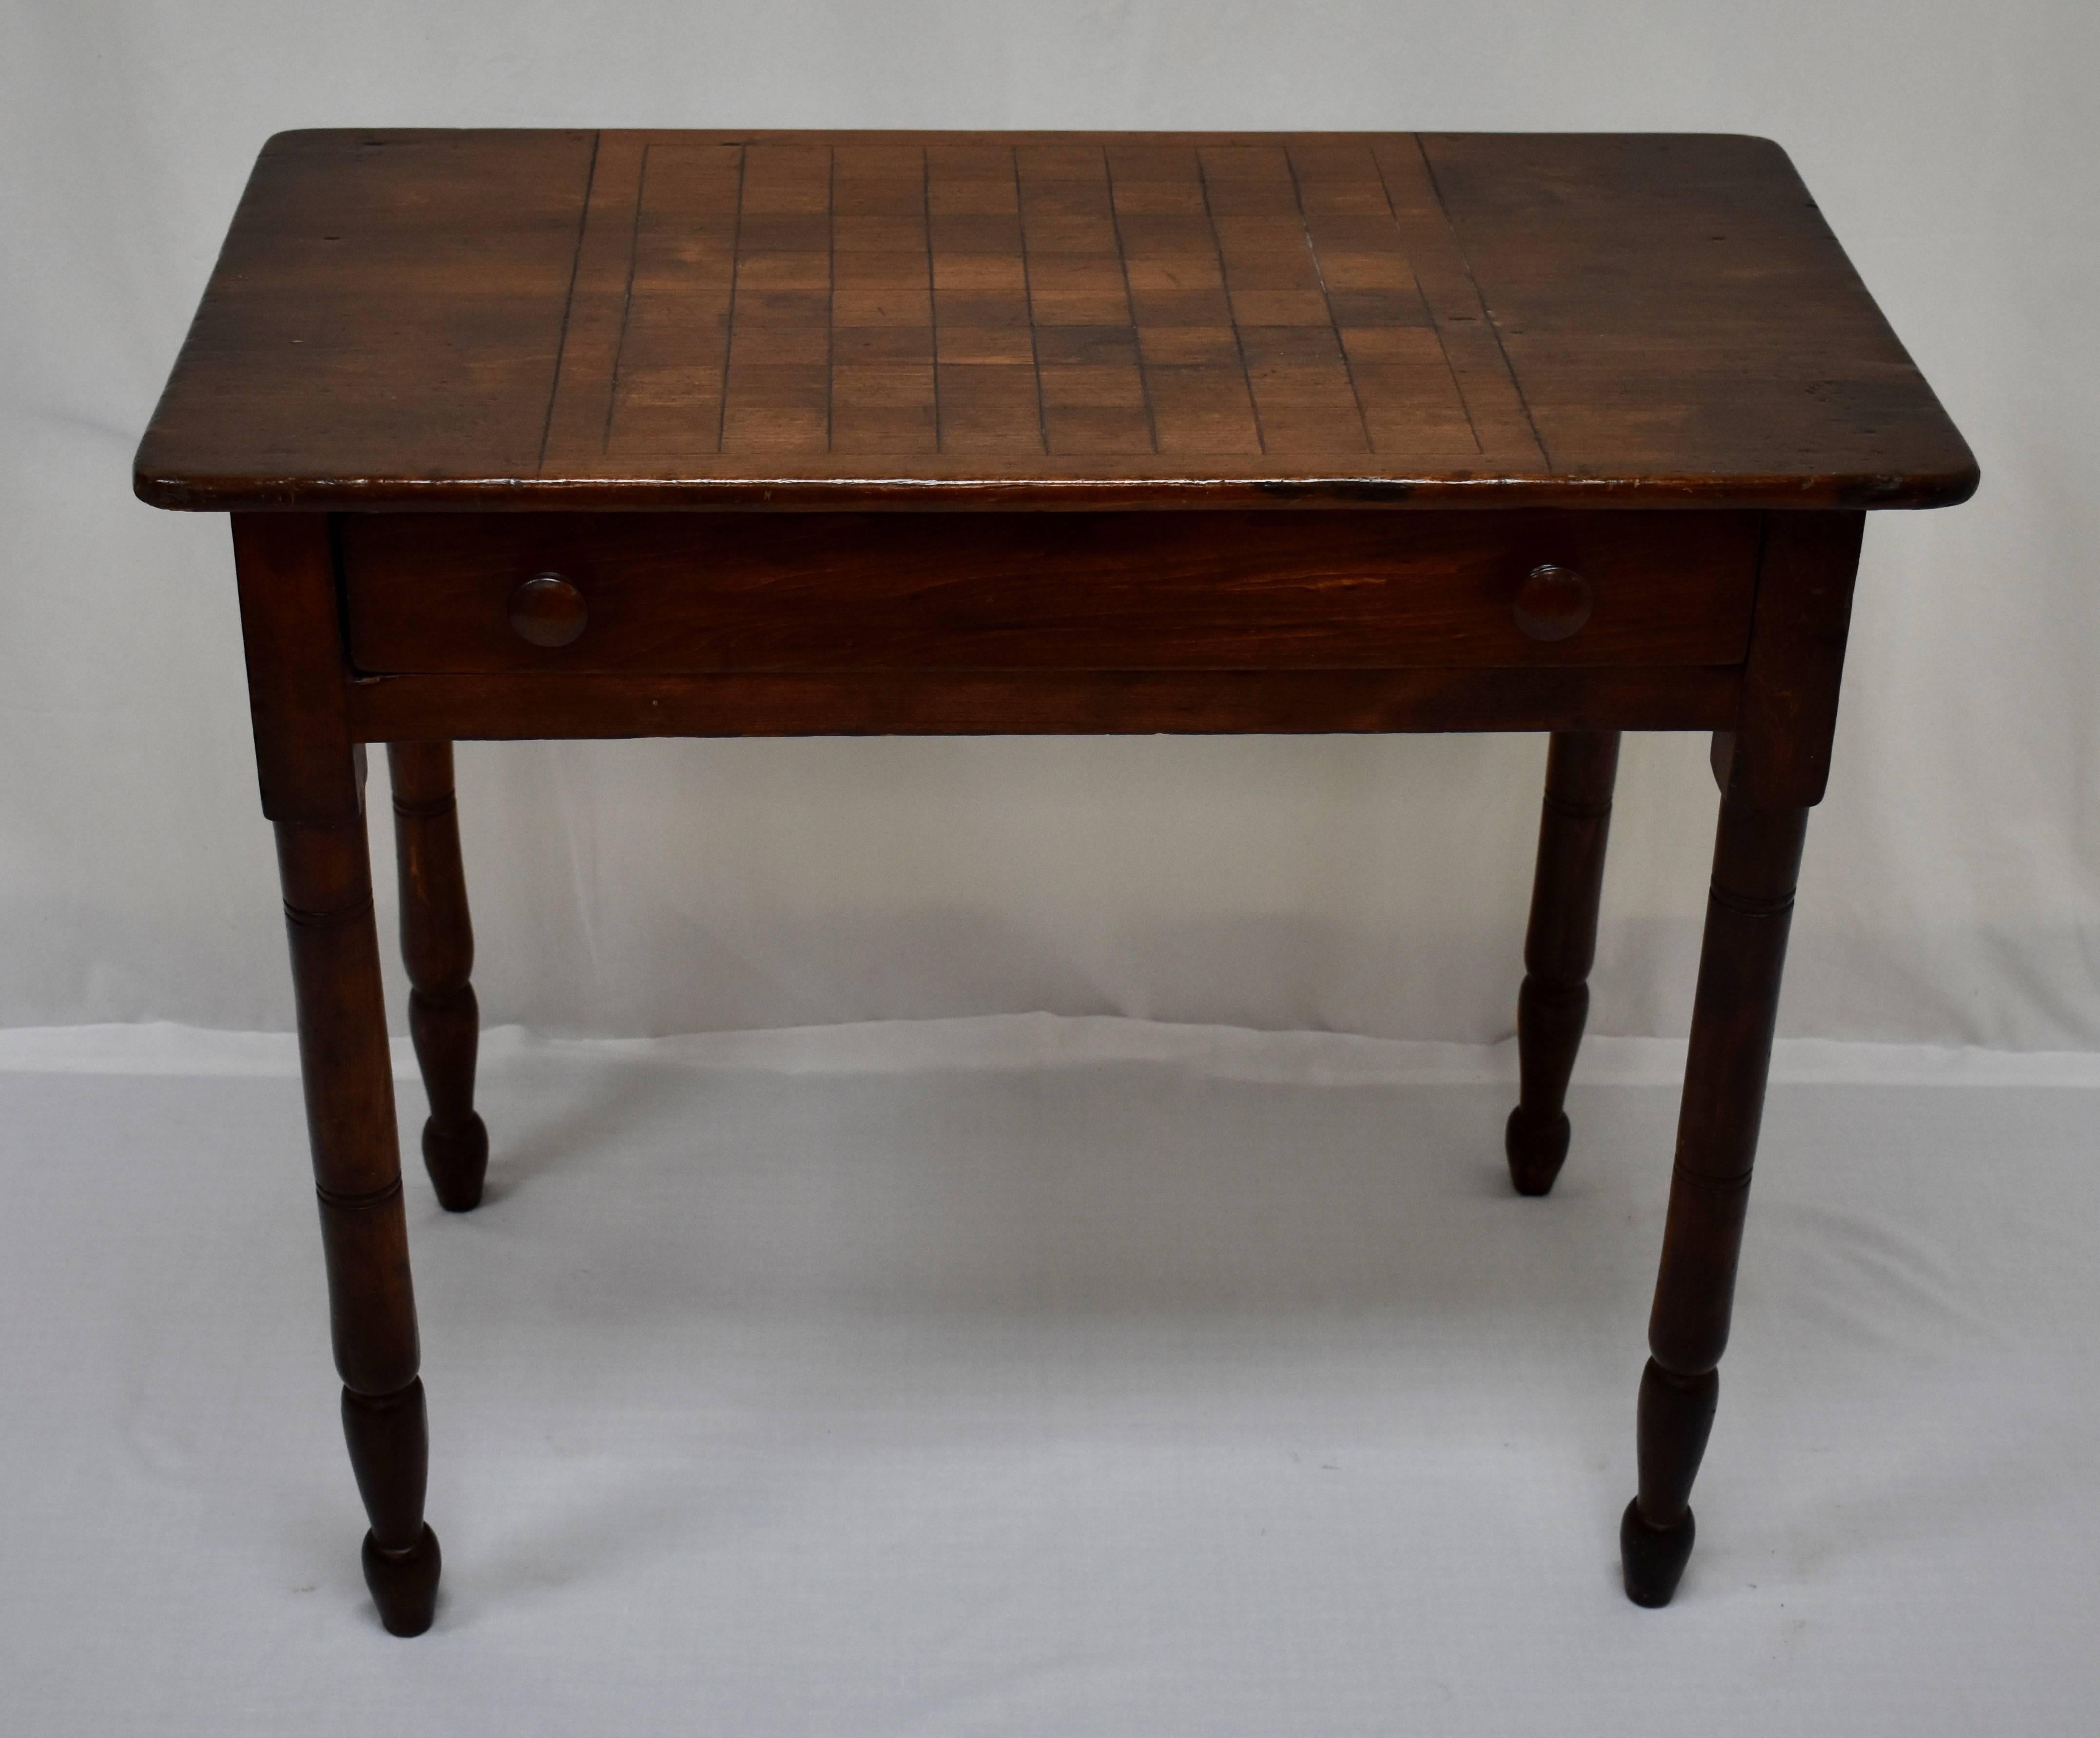 This attractive American poplar side table has four slender turned and incised legs and a single long peg-joined drawer with original wooden knobs. A 64 square game board with border is etched into the top and the piece is finished in a rich walnut